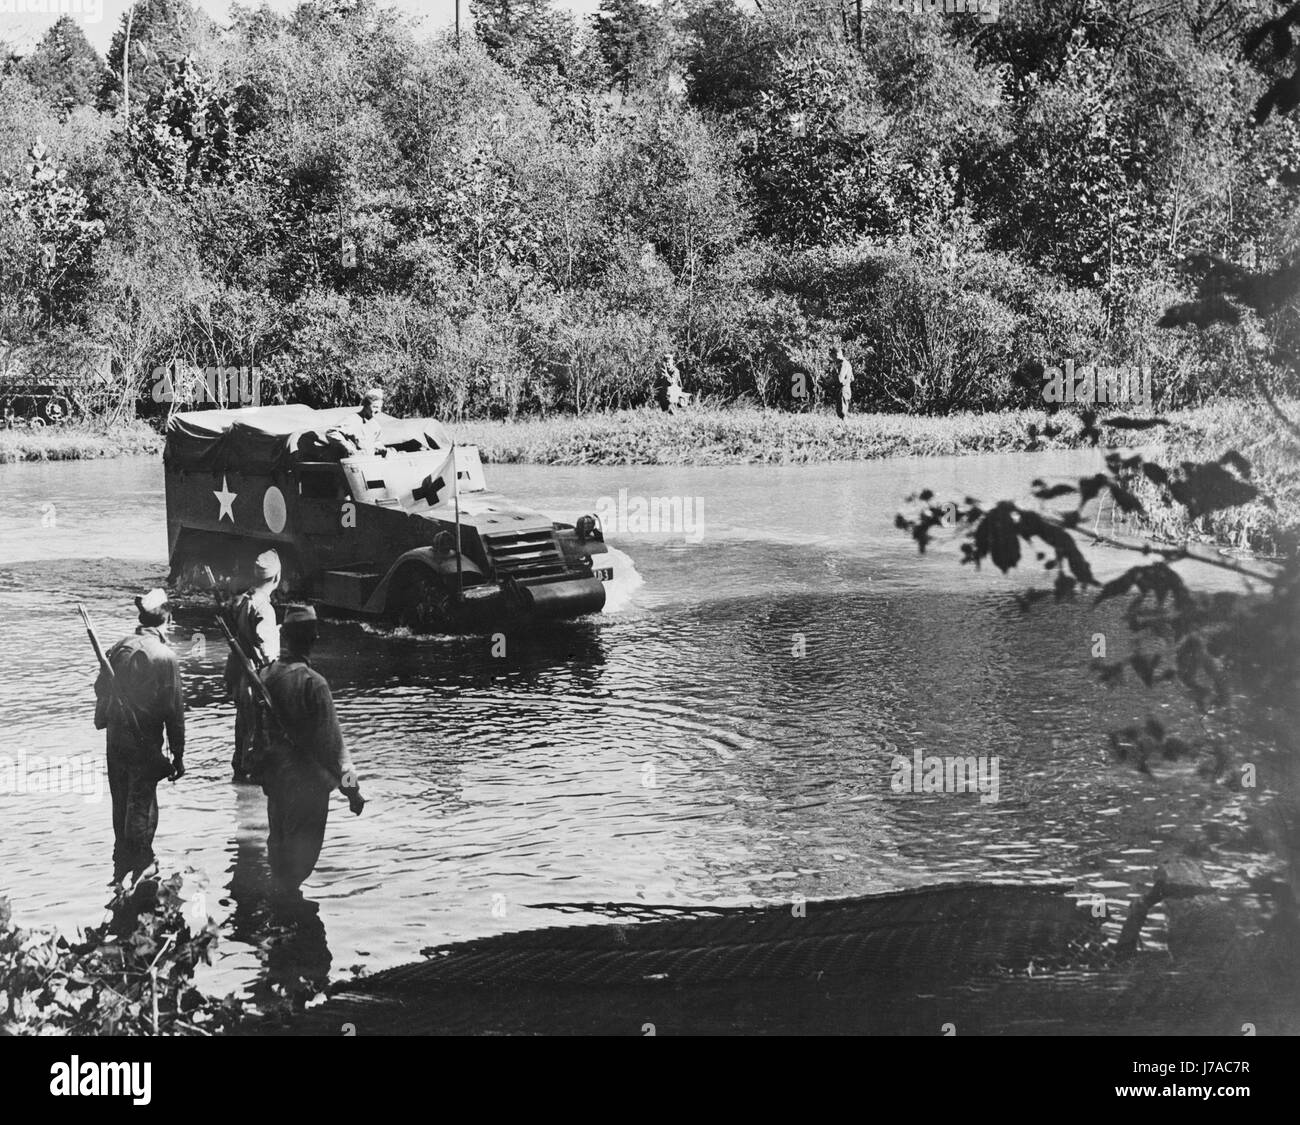 An armored half-track vehicle crossing the river, circa 1942. Stock Photo